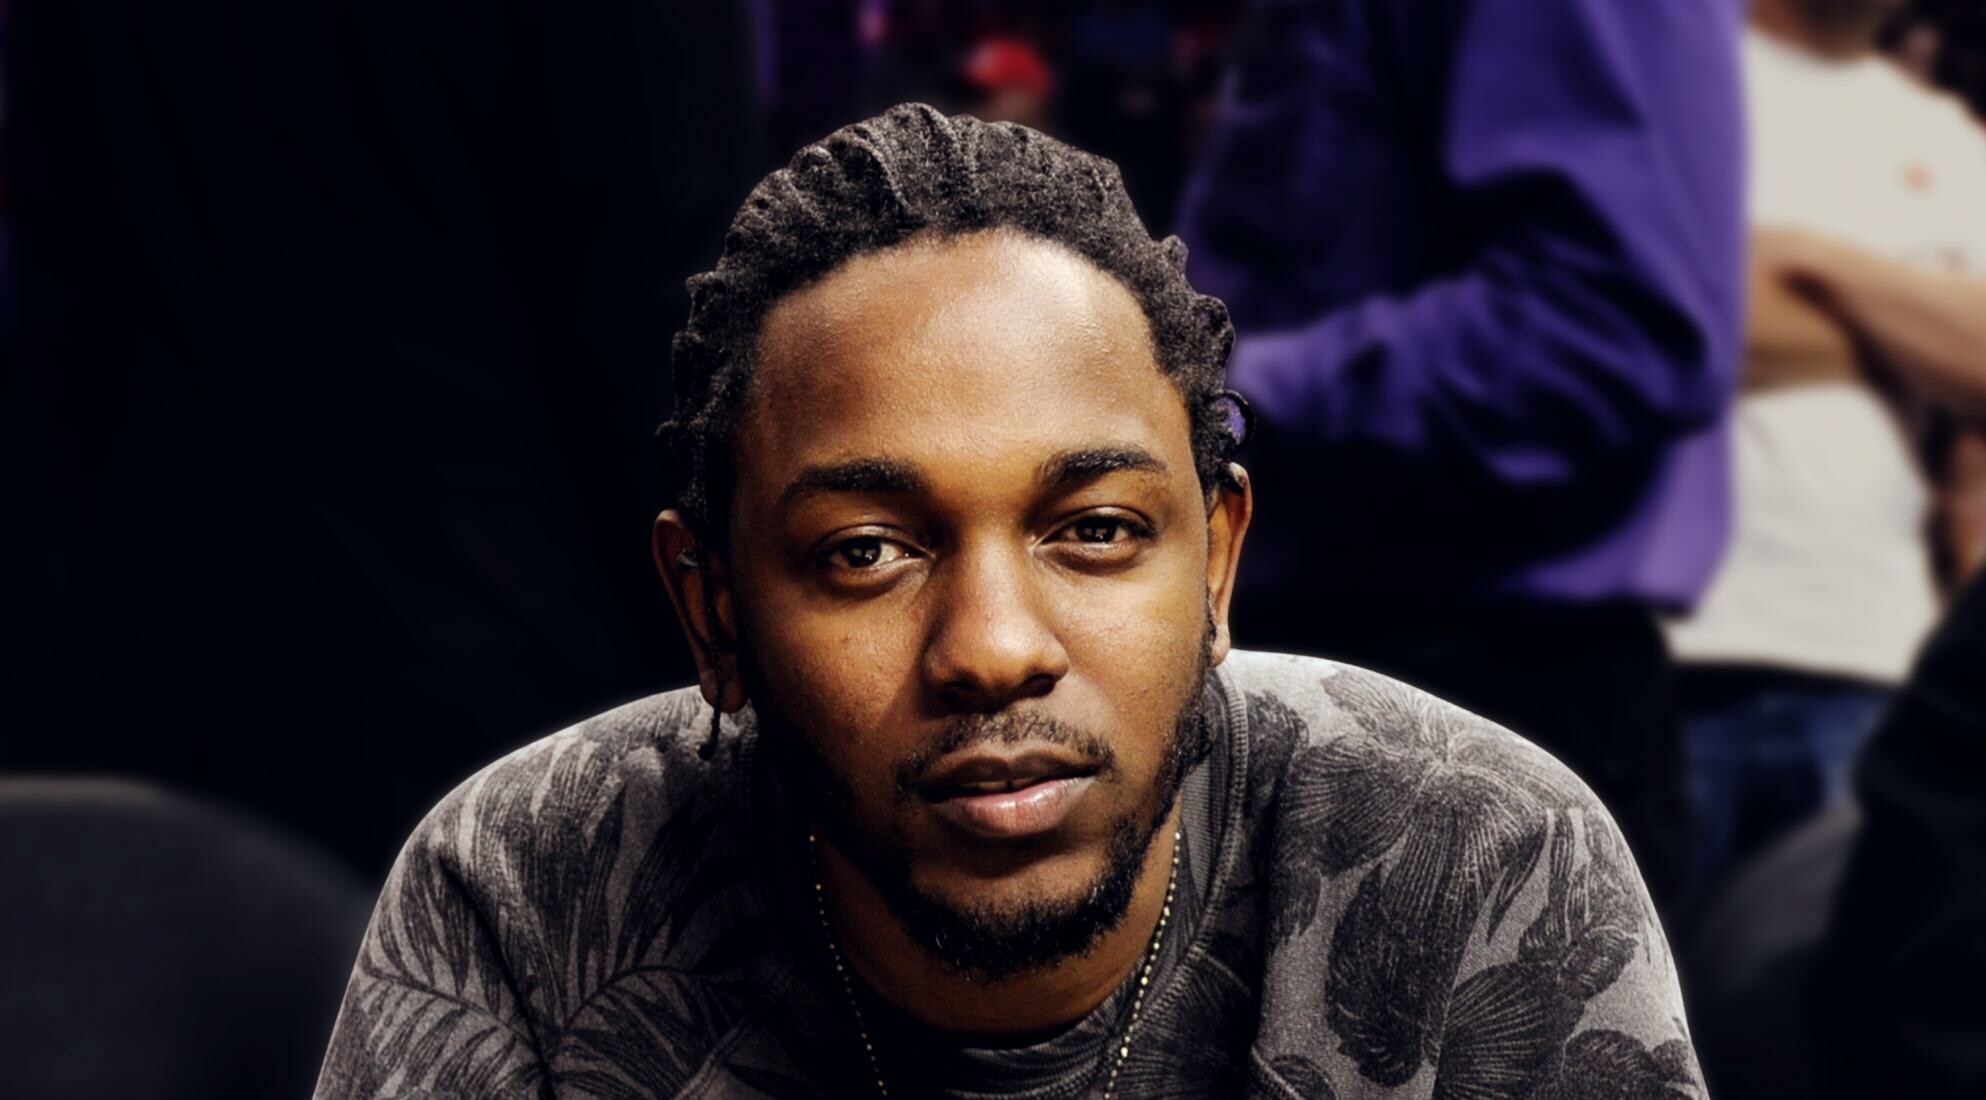 Kendrick Lamar: "Auntie Diaries" reached number 47 on the Billboard Hot 100 and number 21 on the Hot R&B/Hip-Hop Songs chart. 1990x1100 HD Wallpaper.